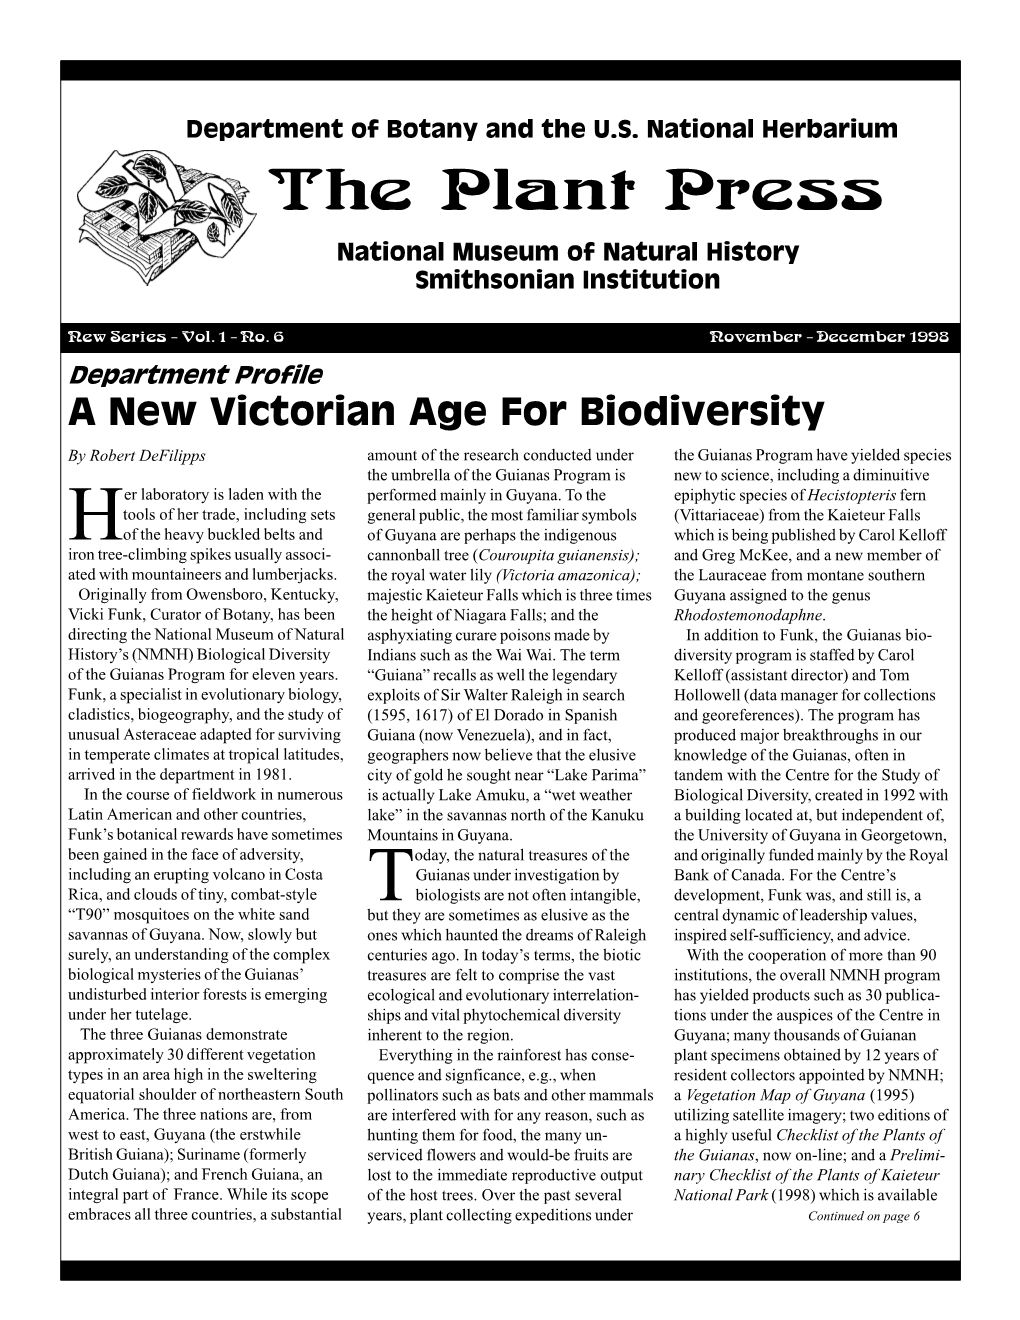 1998 Vol. 1, Issue 6